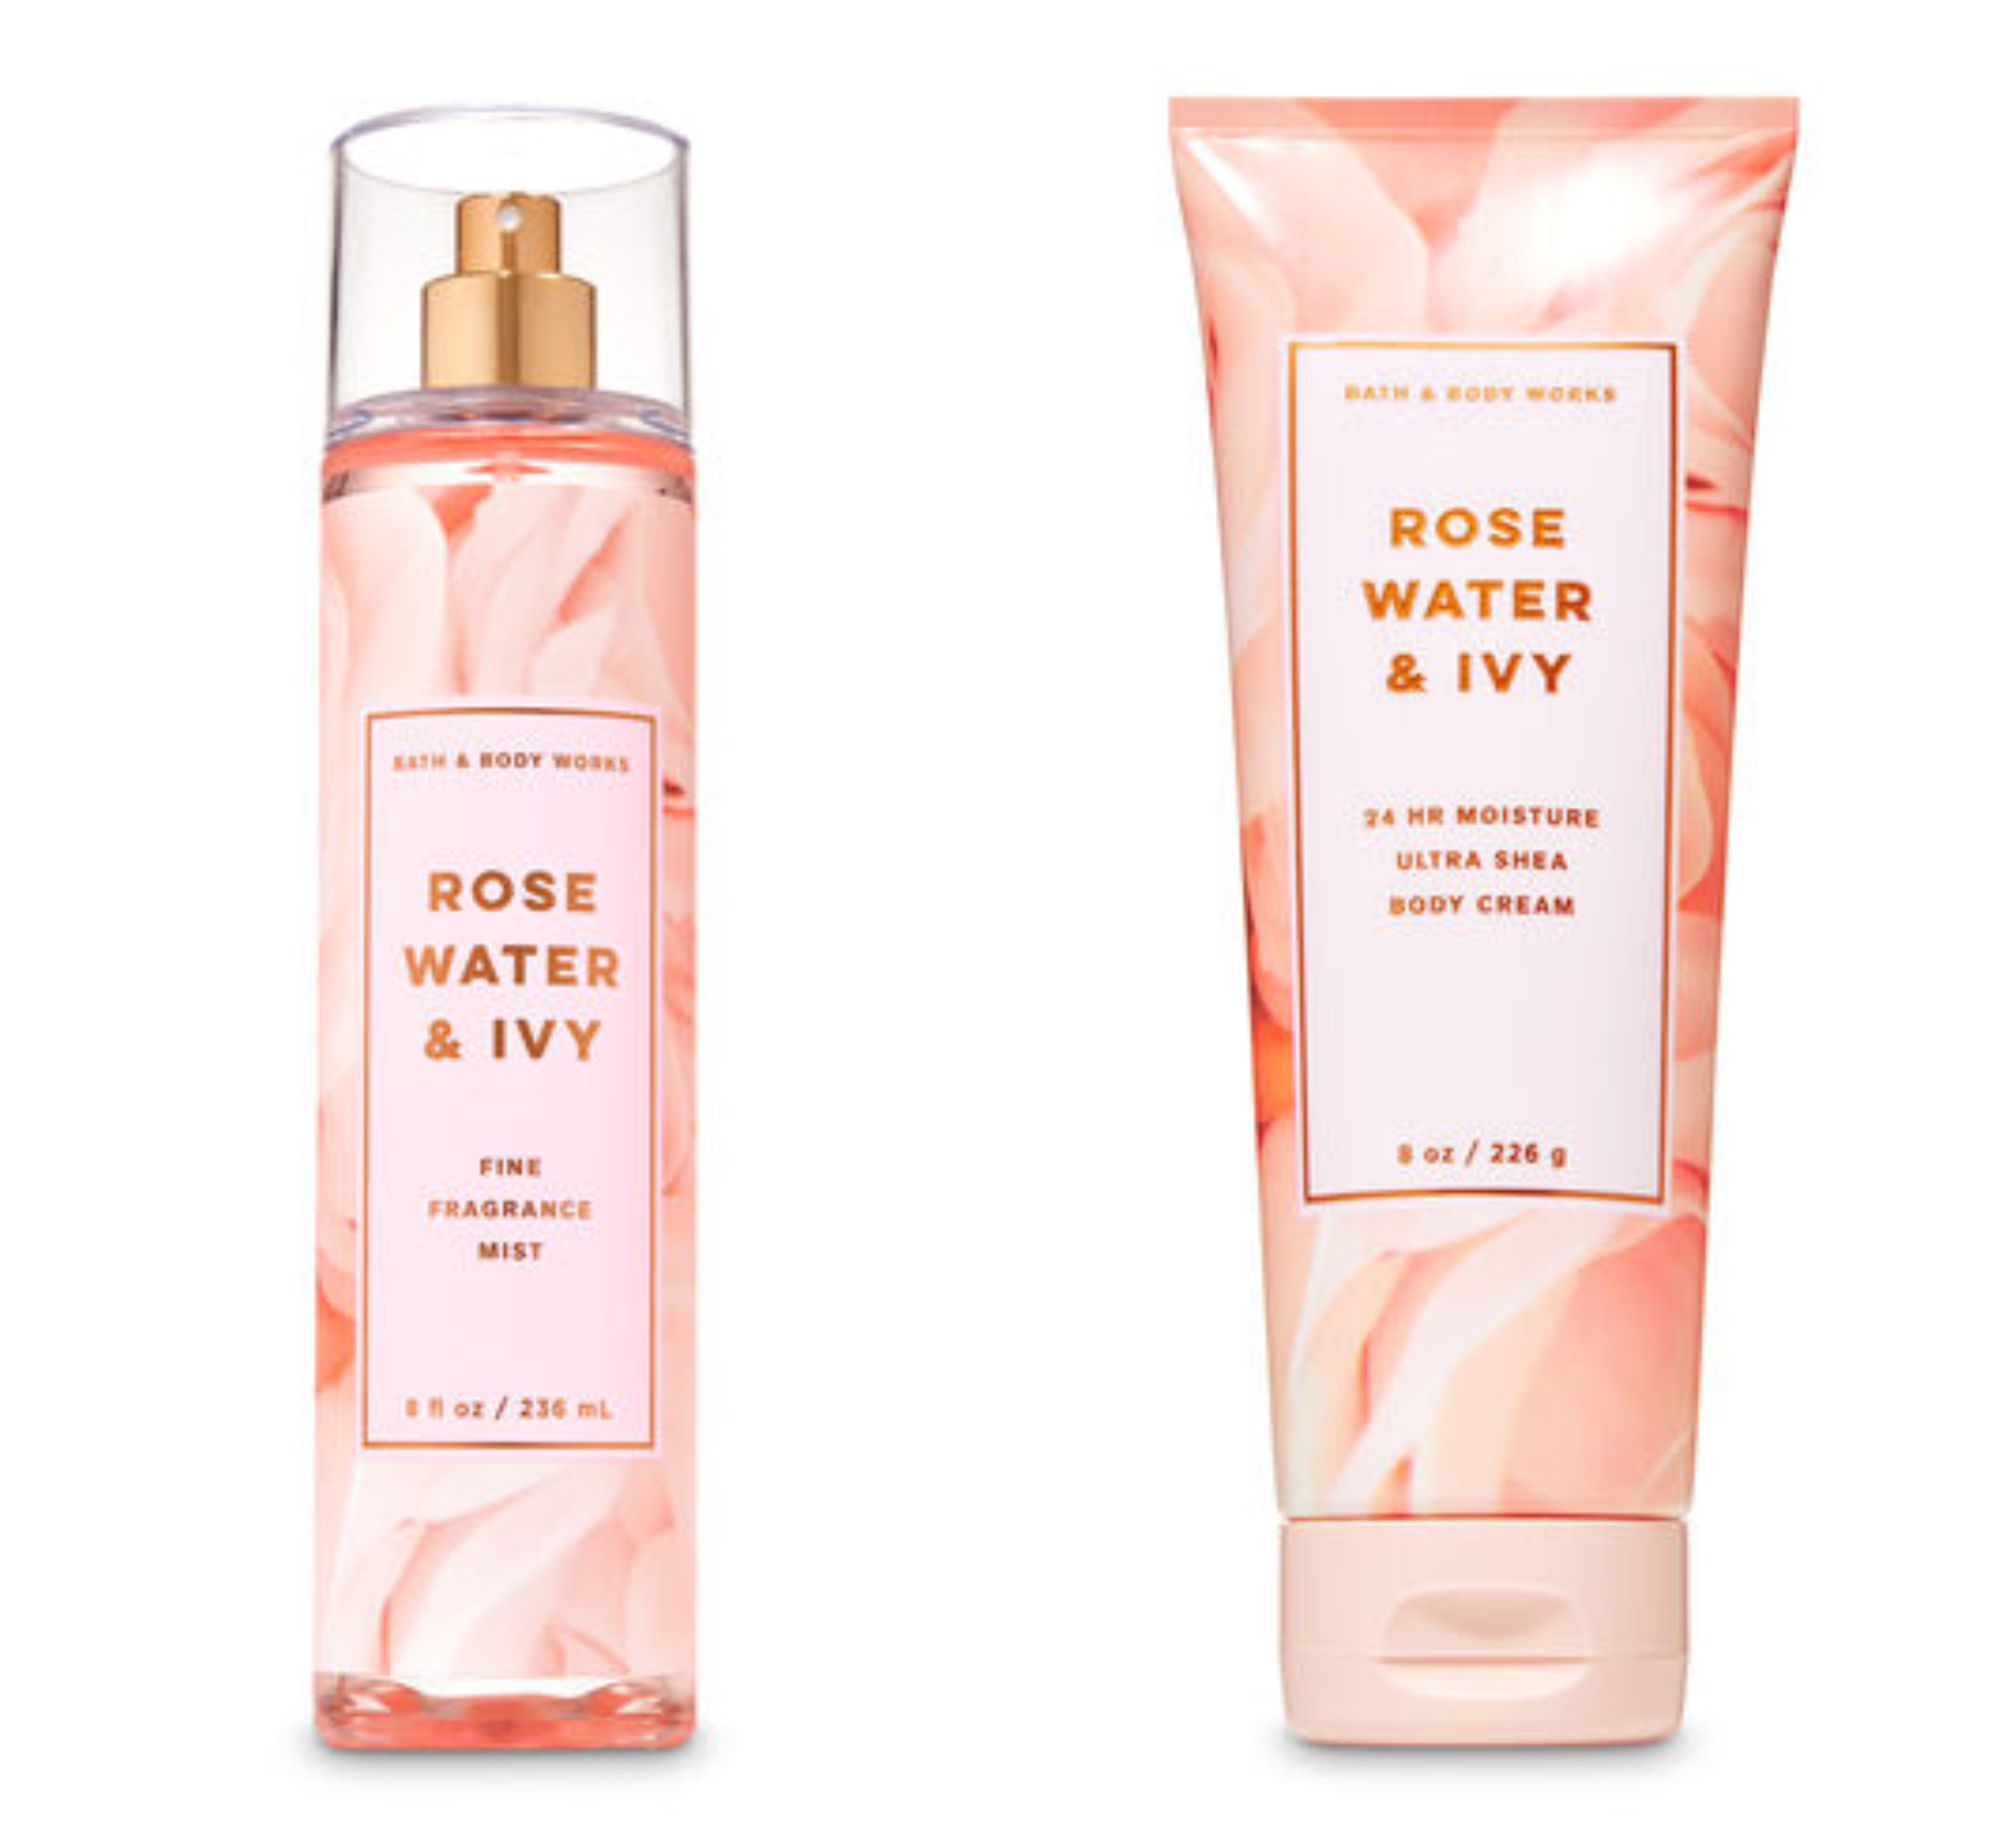 bath and body works rose water and ivy fragrance mist. 